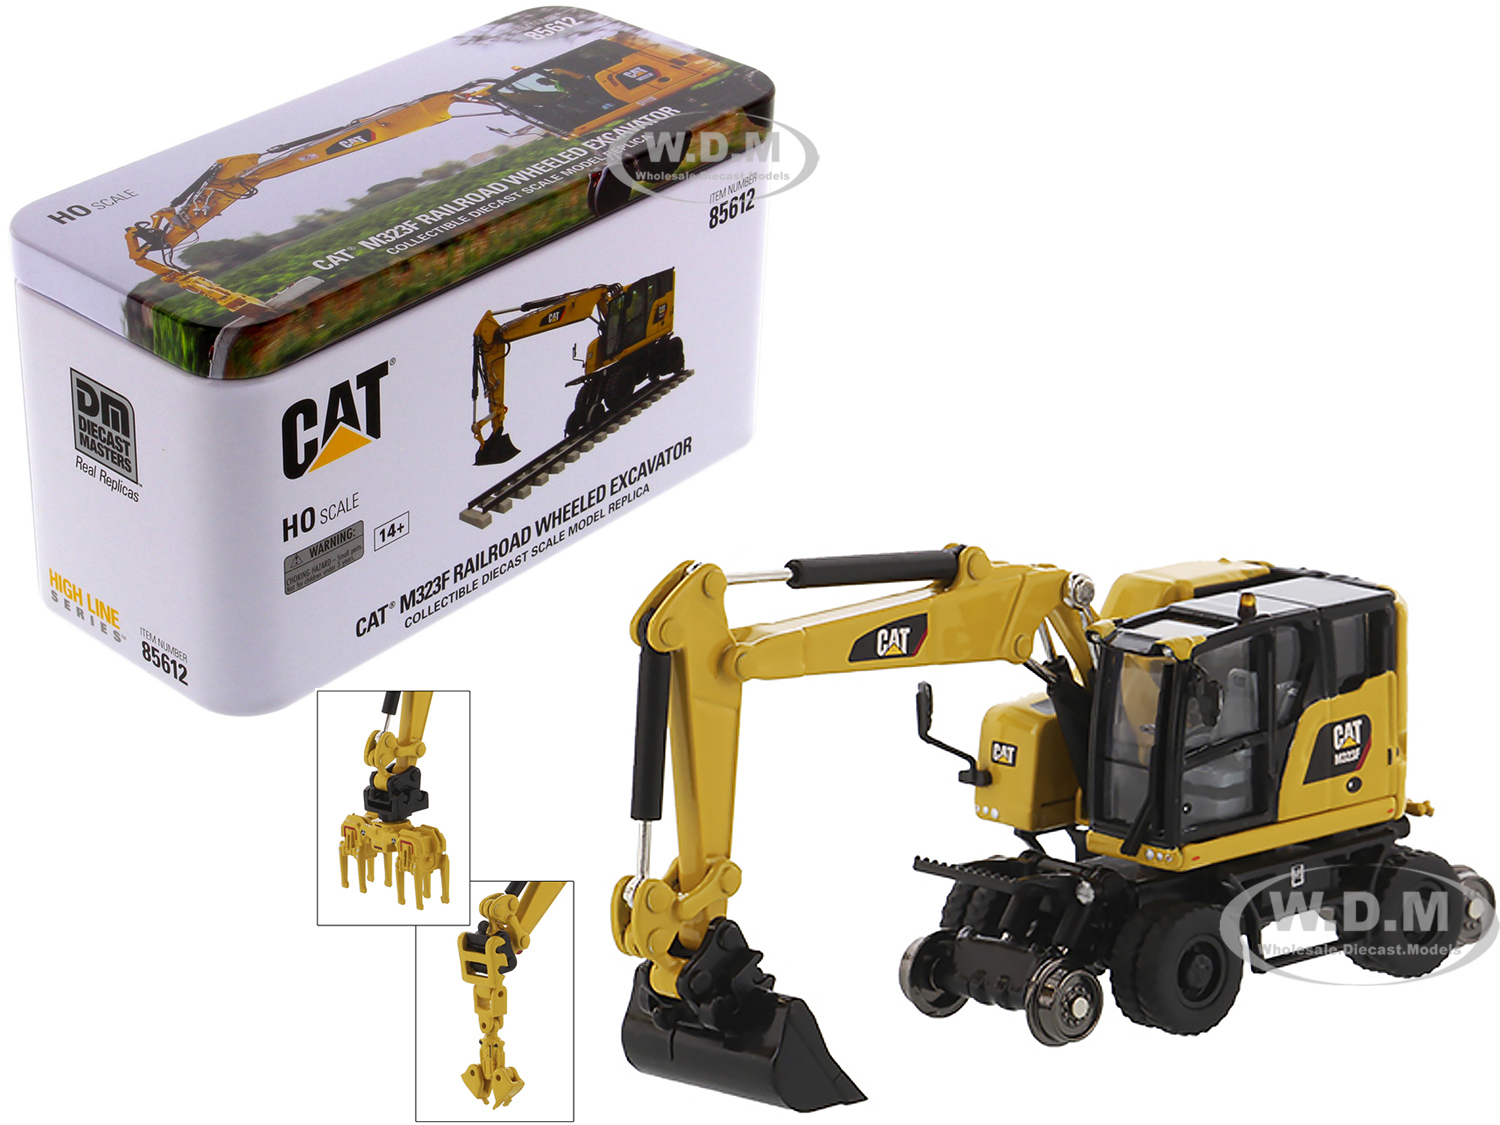 CAT Caterpillar M323F Railroad Wheeled Excavator with 3 Accessories (Safety Yellow Version) "High Line" Series 1/87 (HO) Scale Diecast Model by Dieca